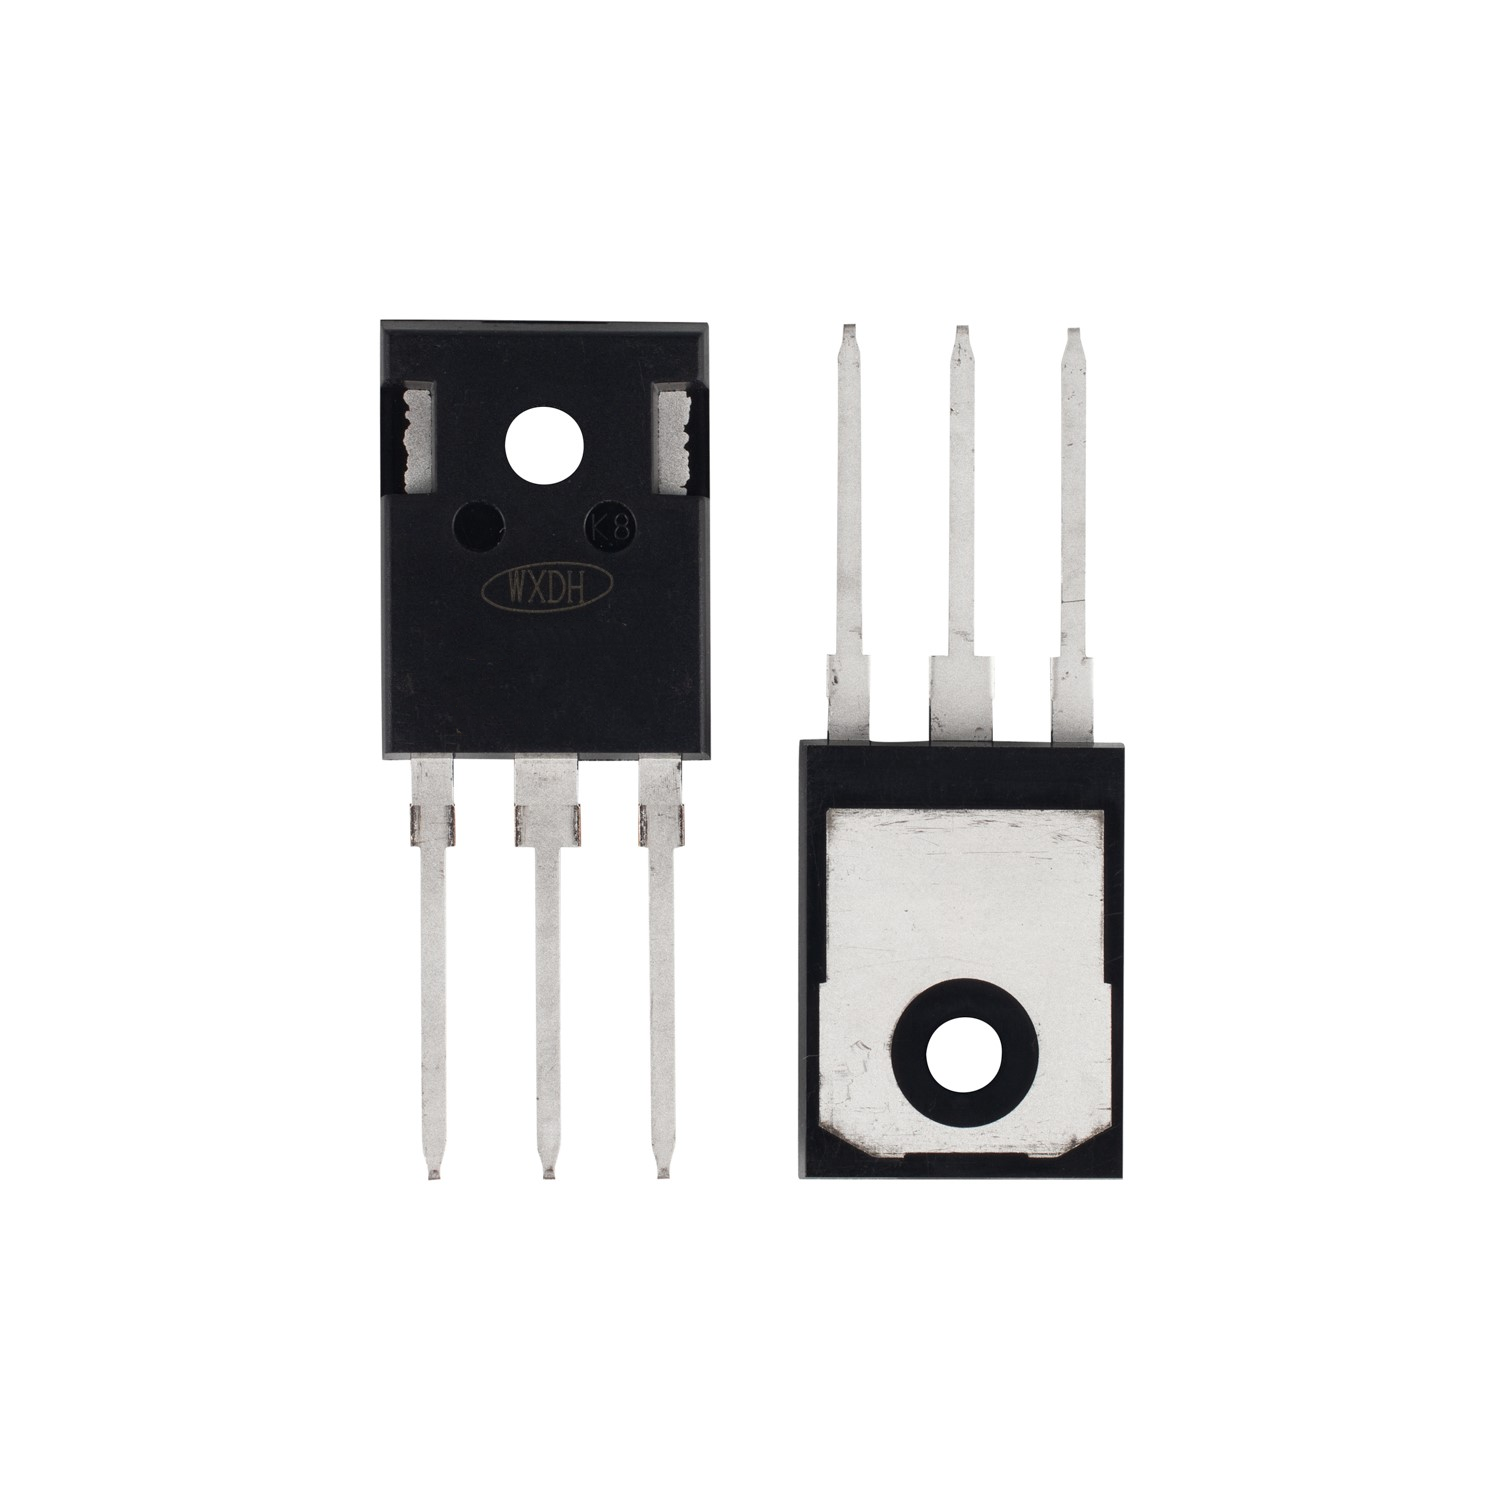 40A 1200V N-channel SiC Power MOSFET DCC075M120G2C